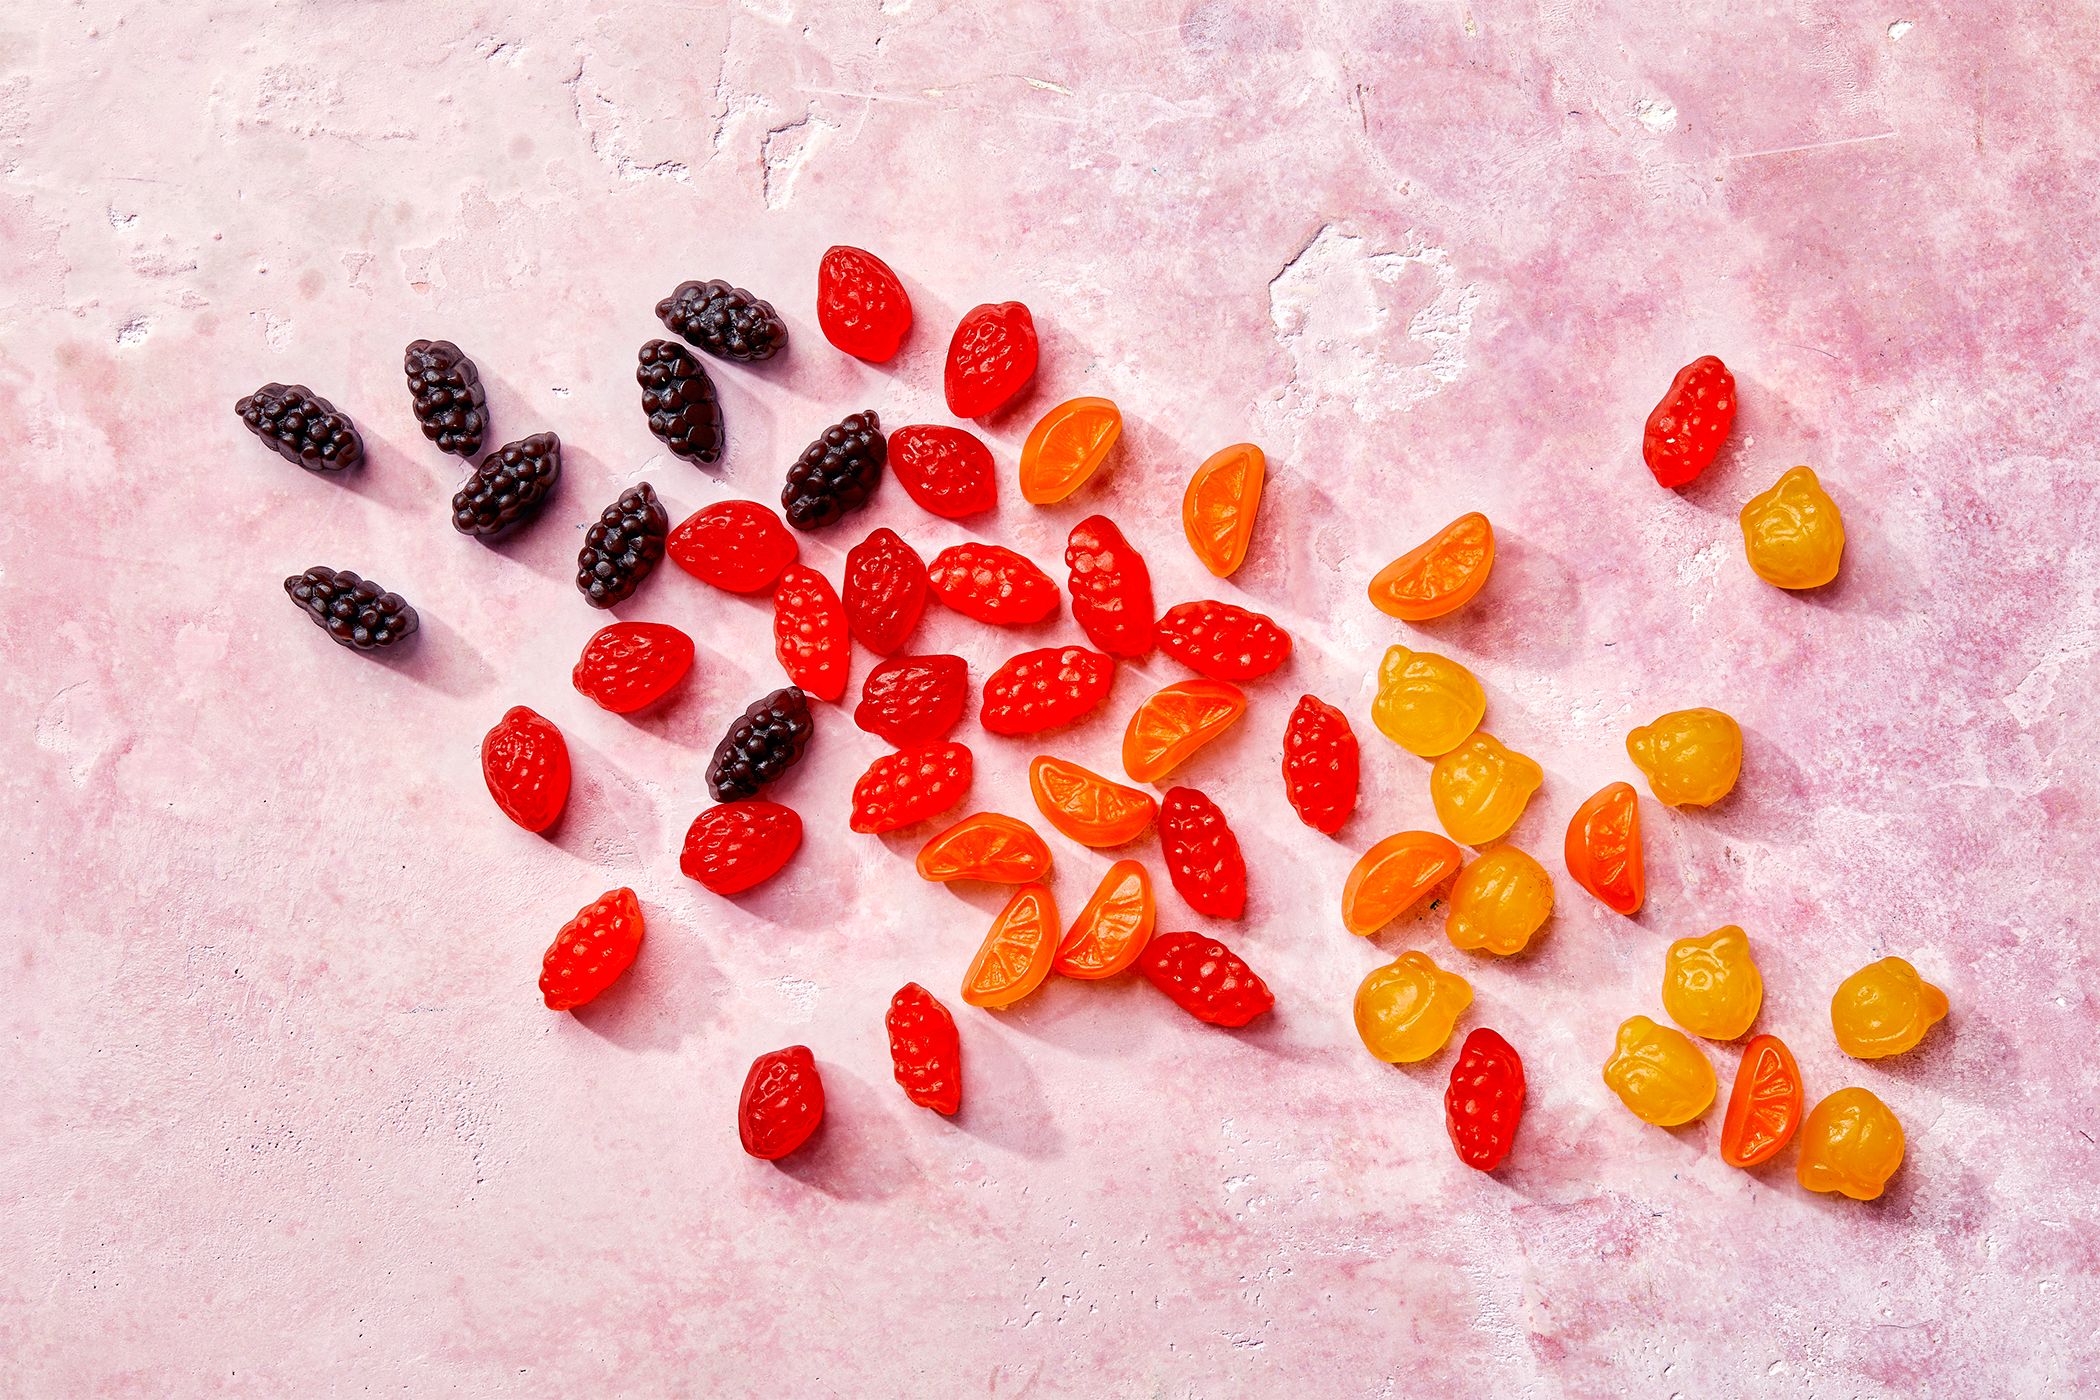 38 Snacks You Used to Think Were Healthy